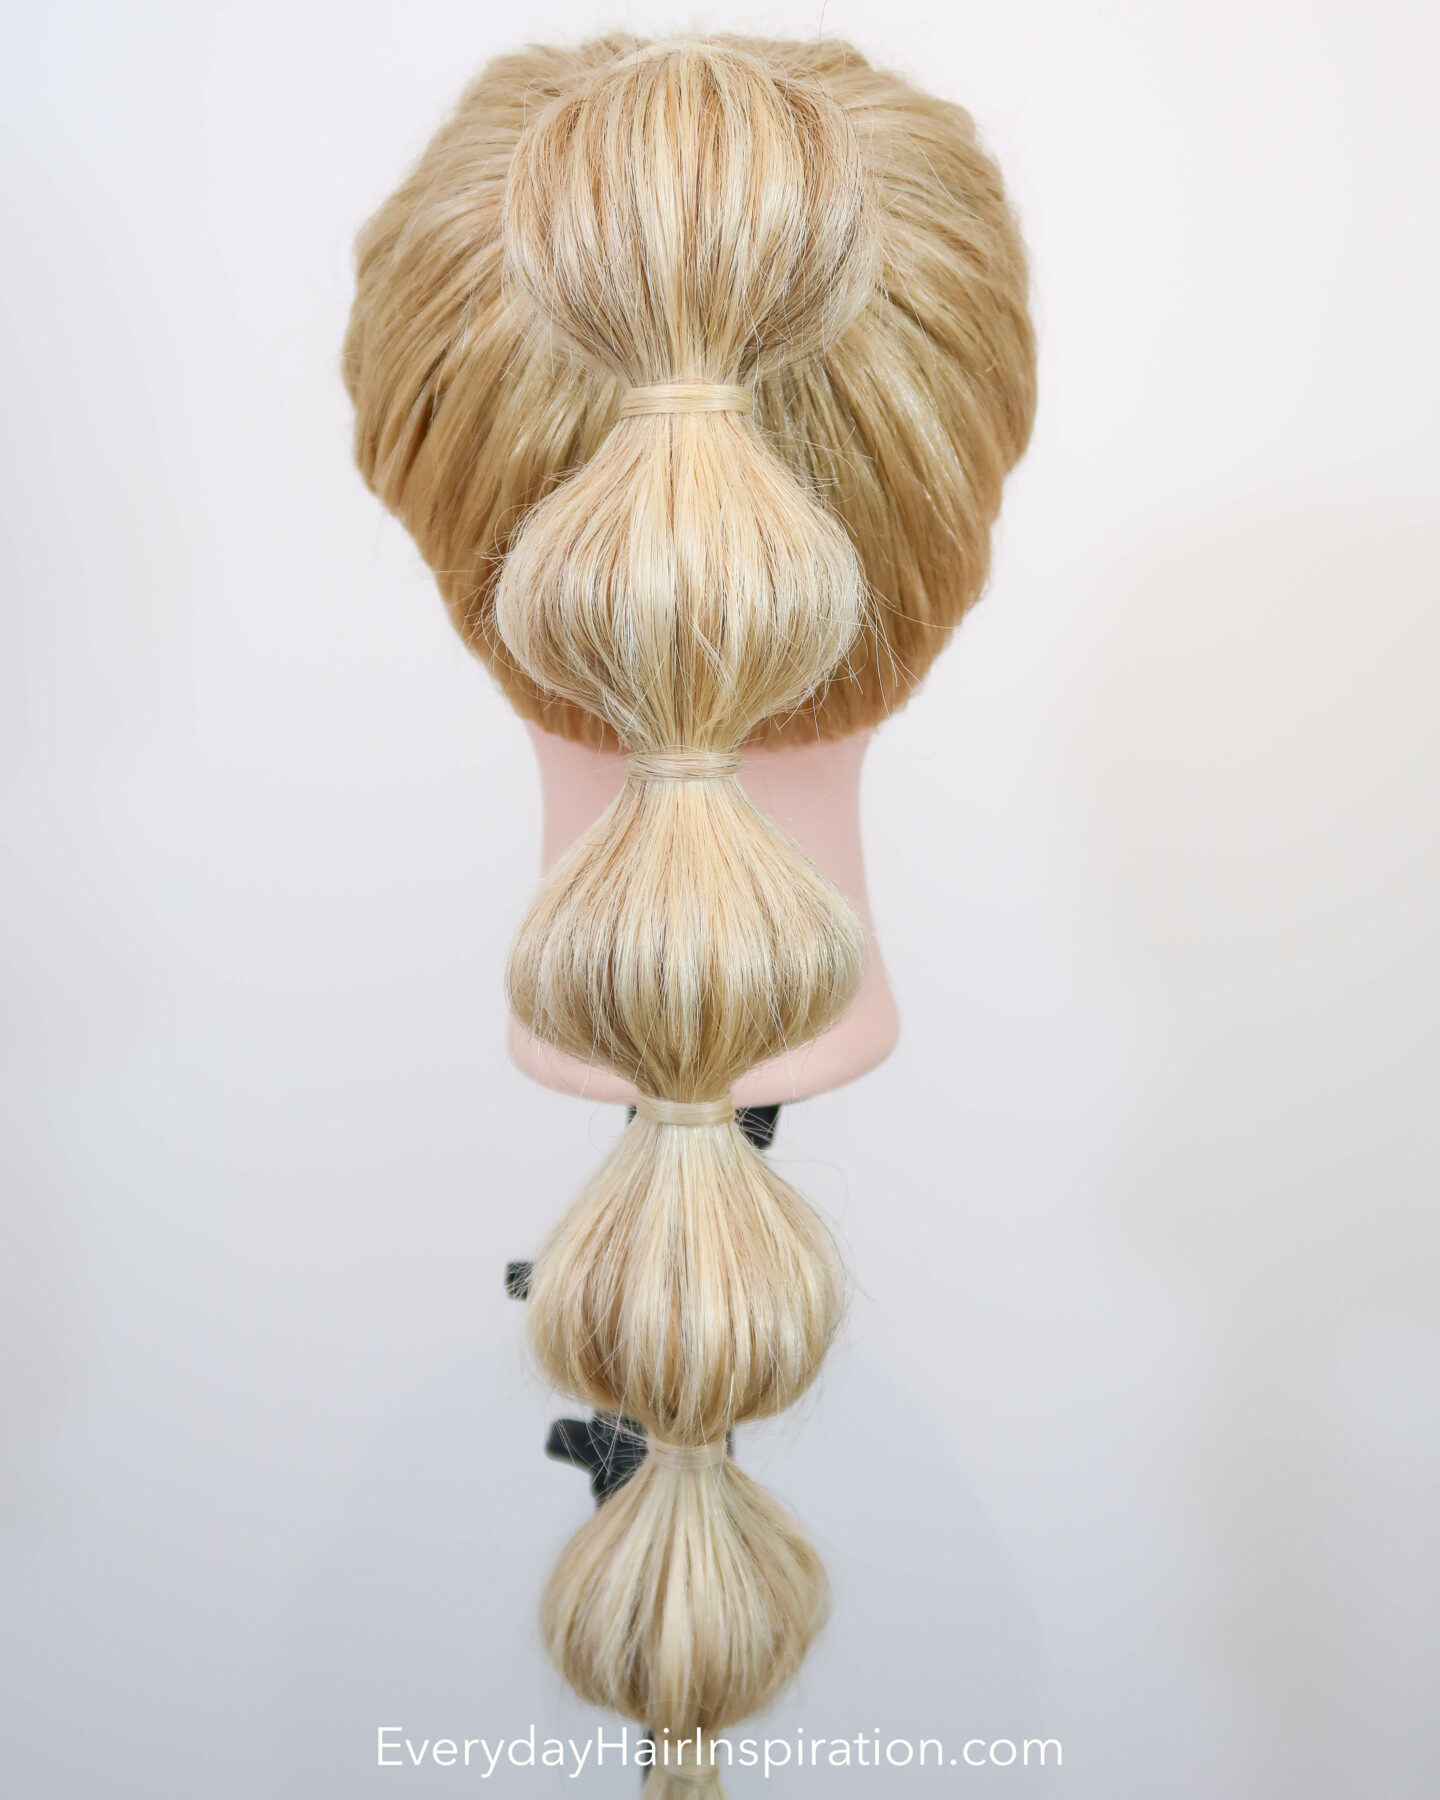 Blonde hairdresser doll, seen from the back with a high ponytail with a bubble braid down the hair. 